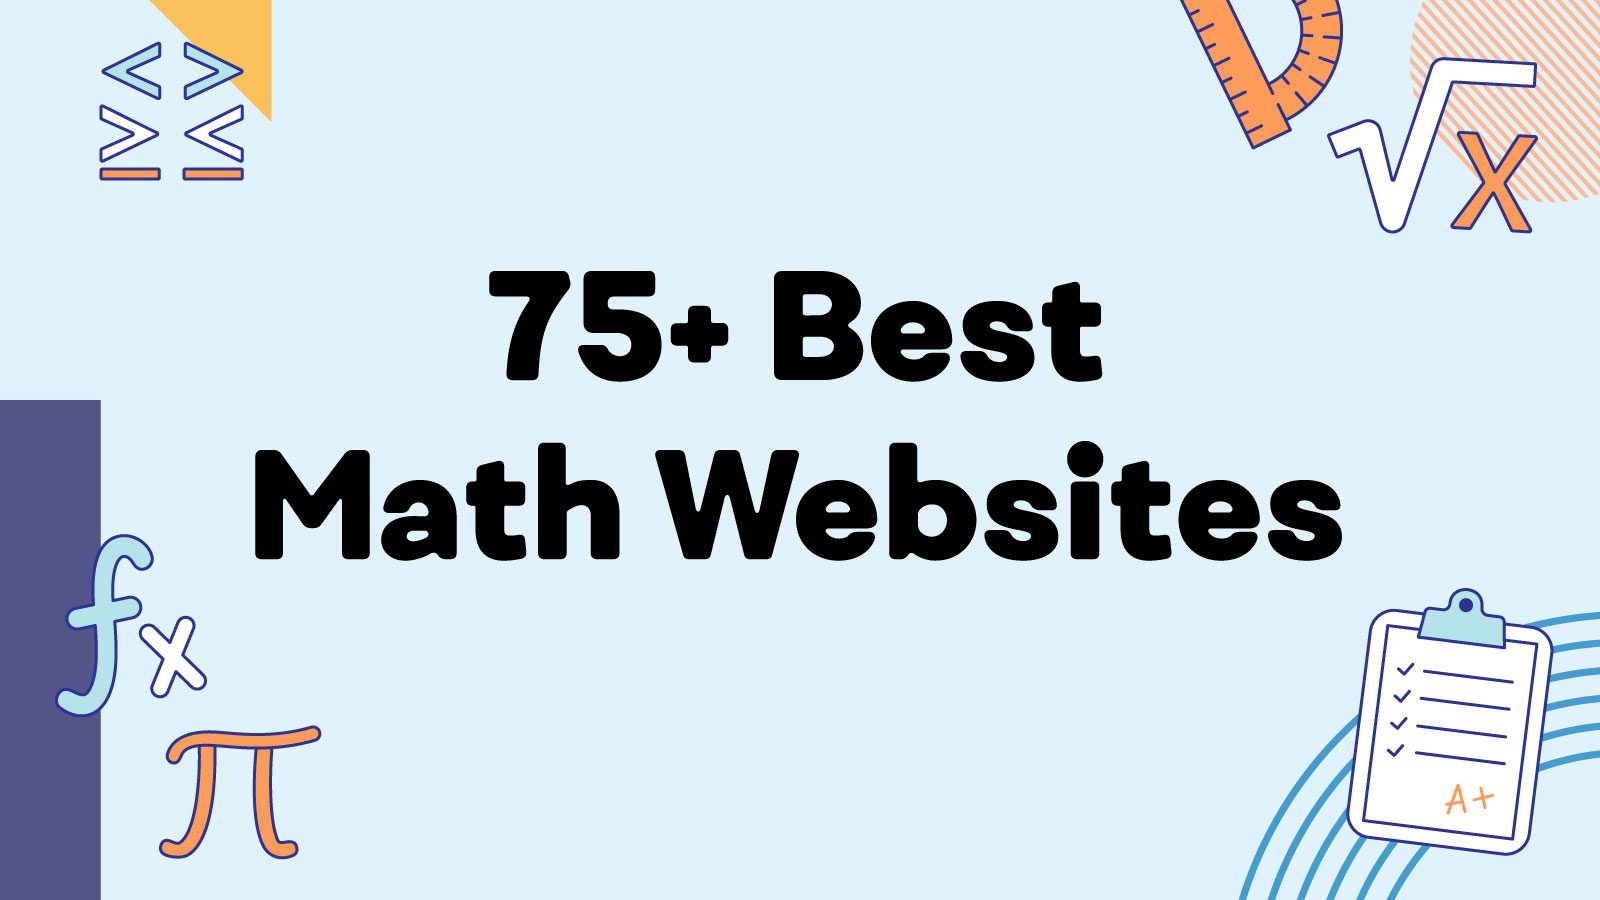 75+ Best Math Websites for the Classroom and Learning at Home